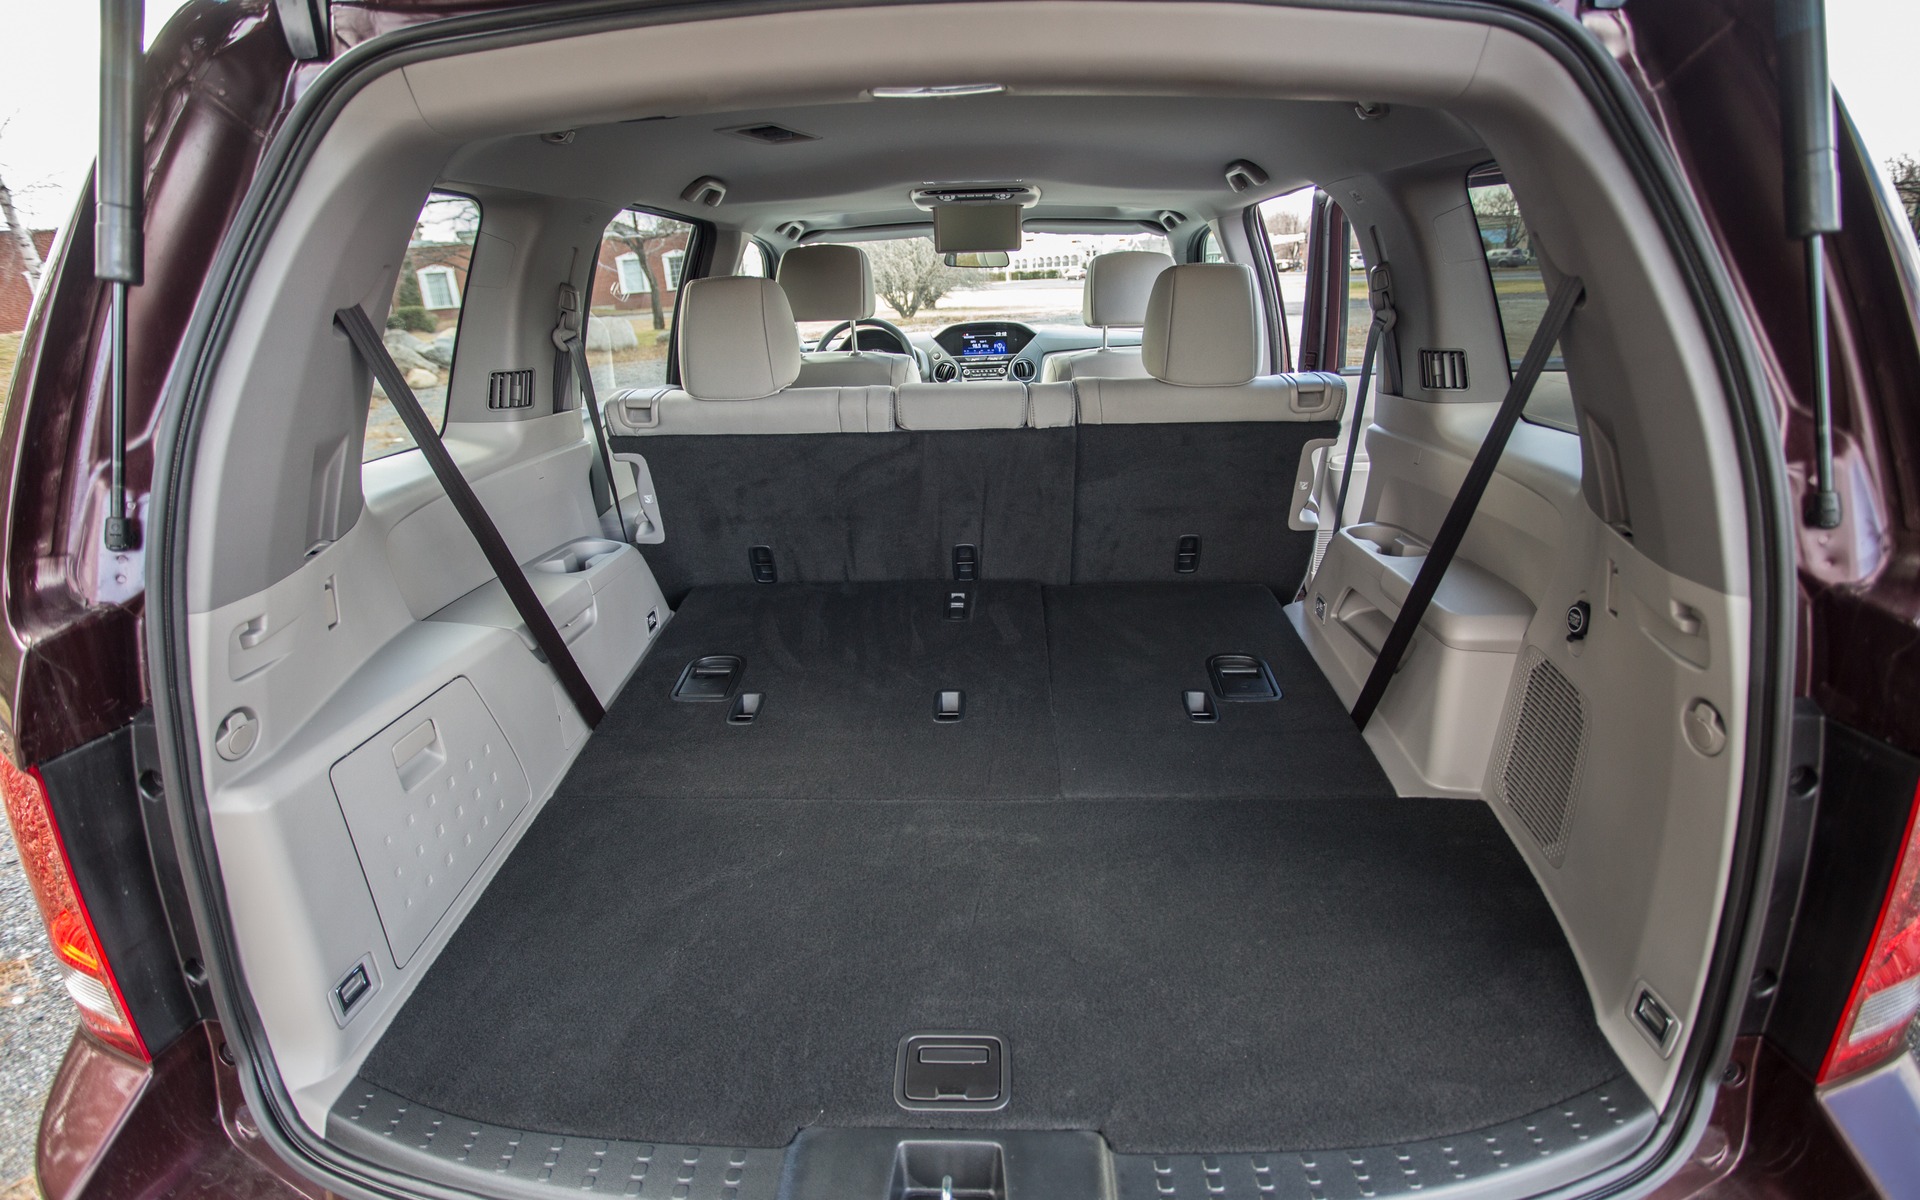 The space becomes even more generous in the five-seat configuration.